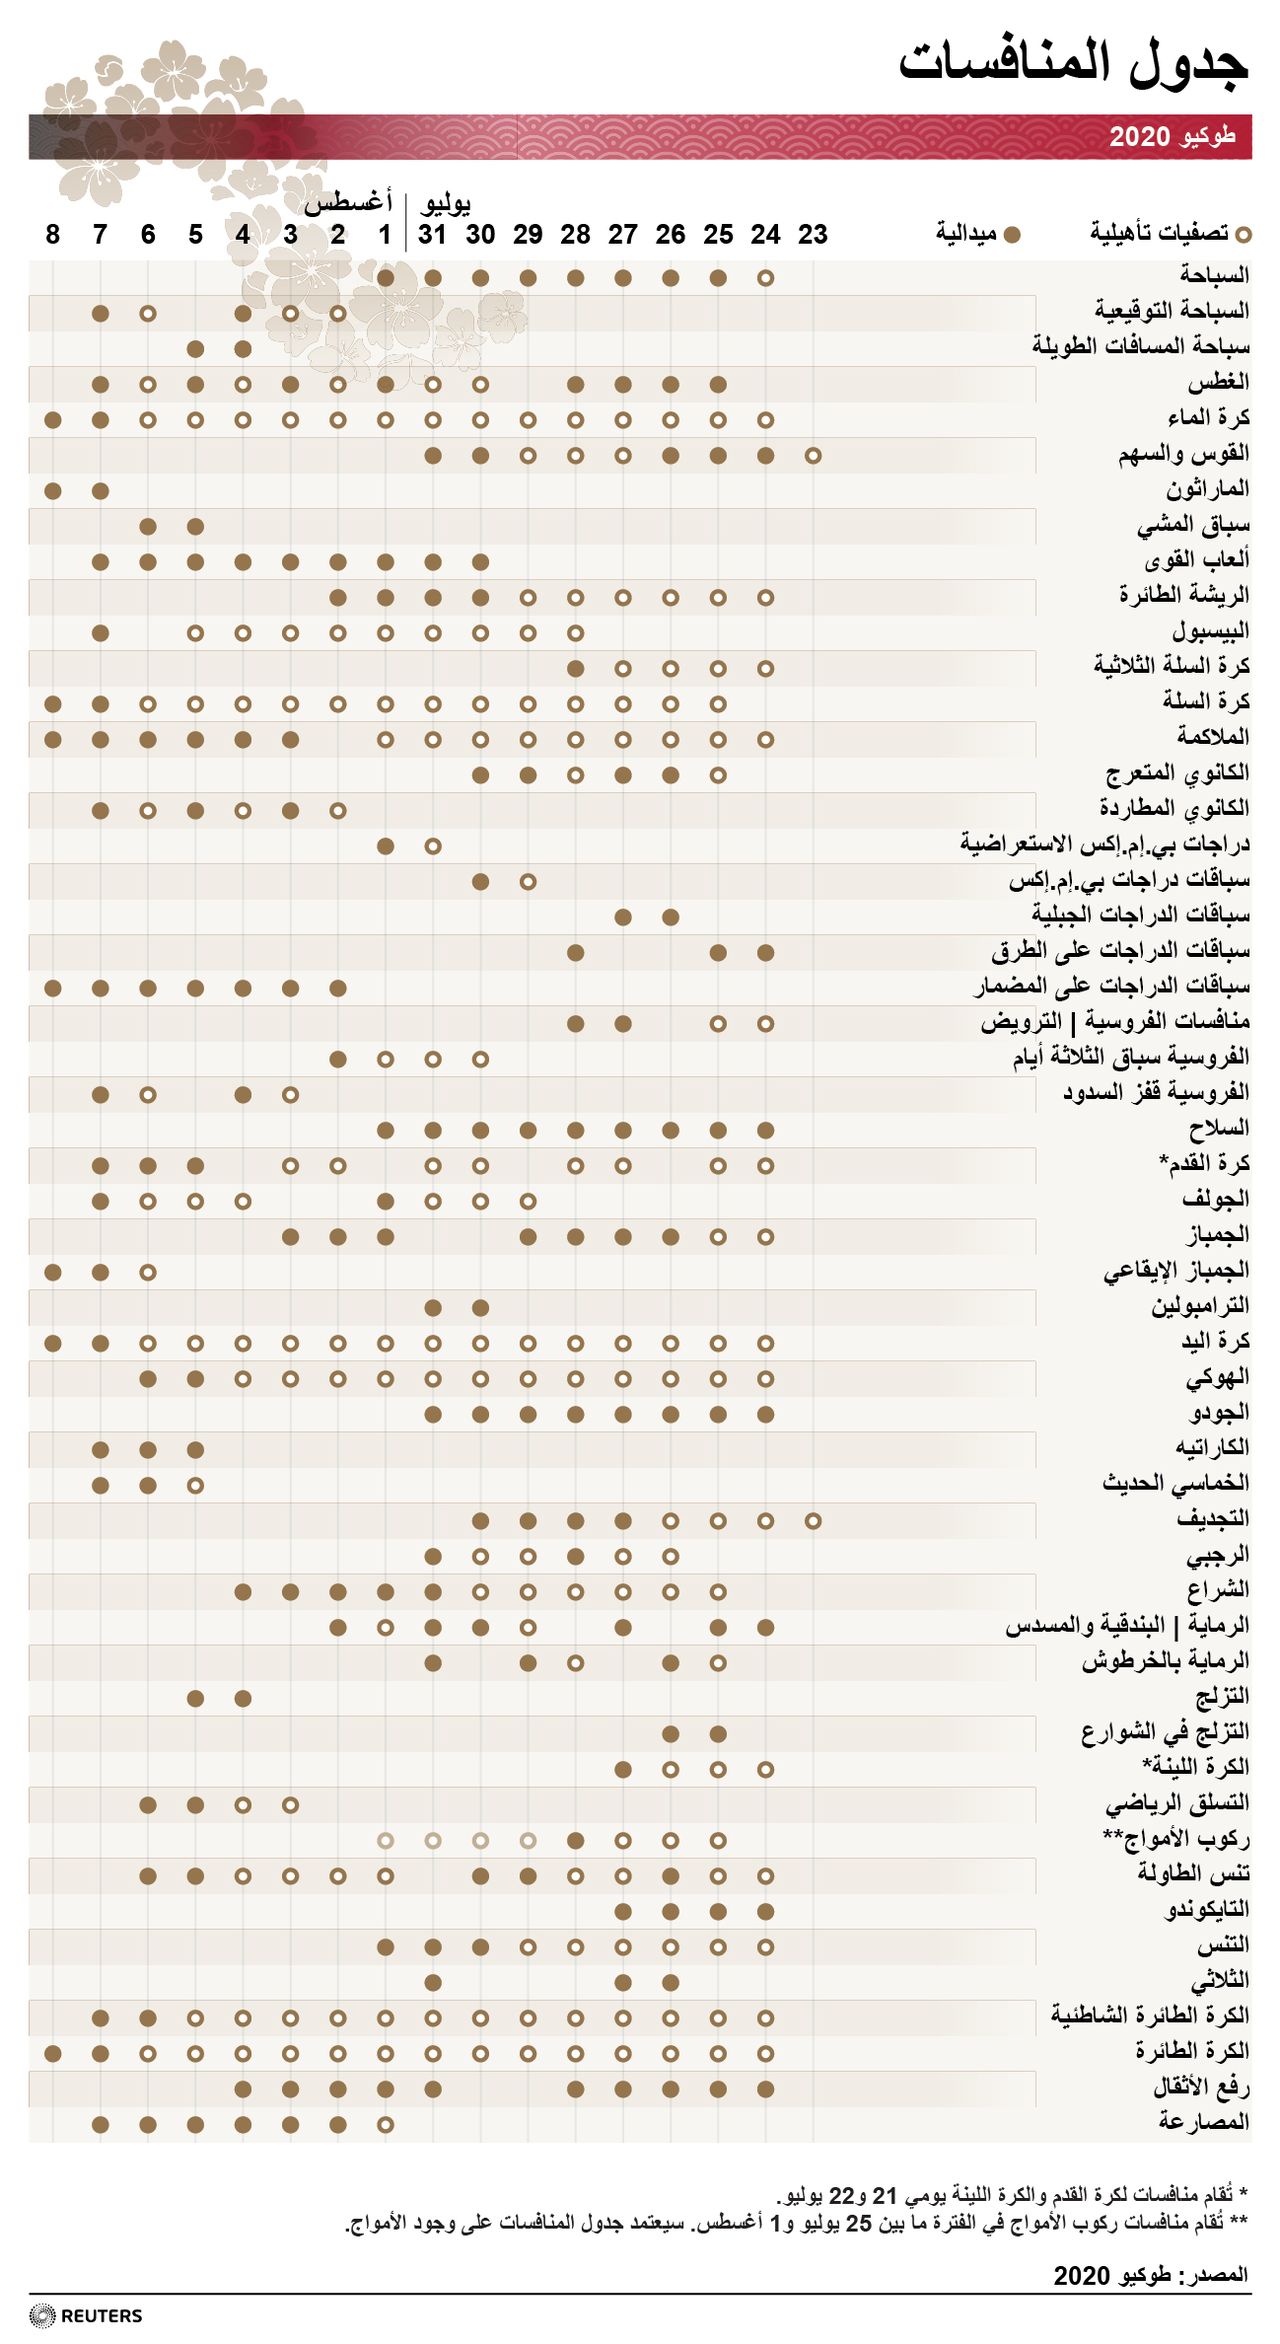 Schedule of the Tokyo 2020 Olympics by sport and discipline. (In Arabic)